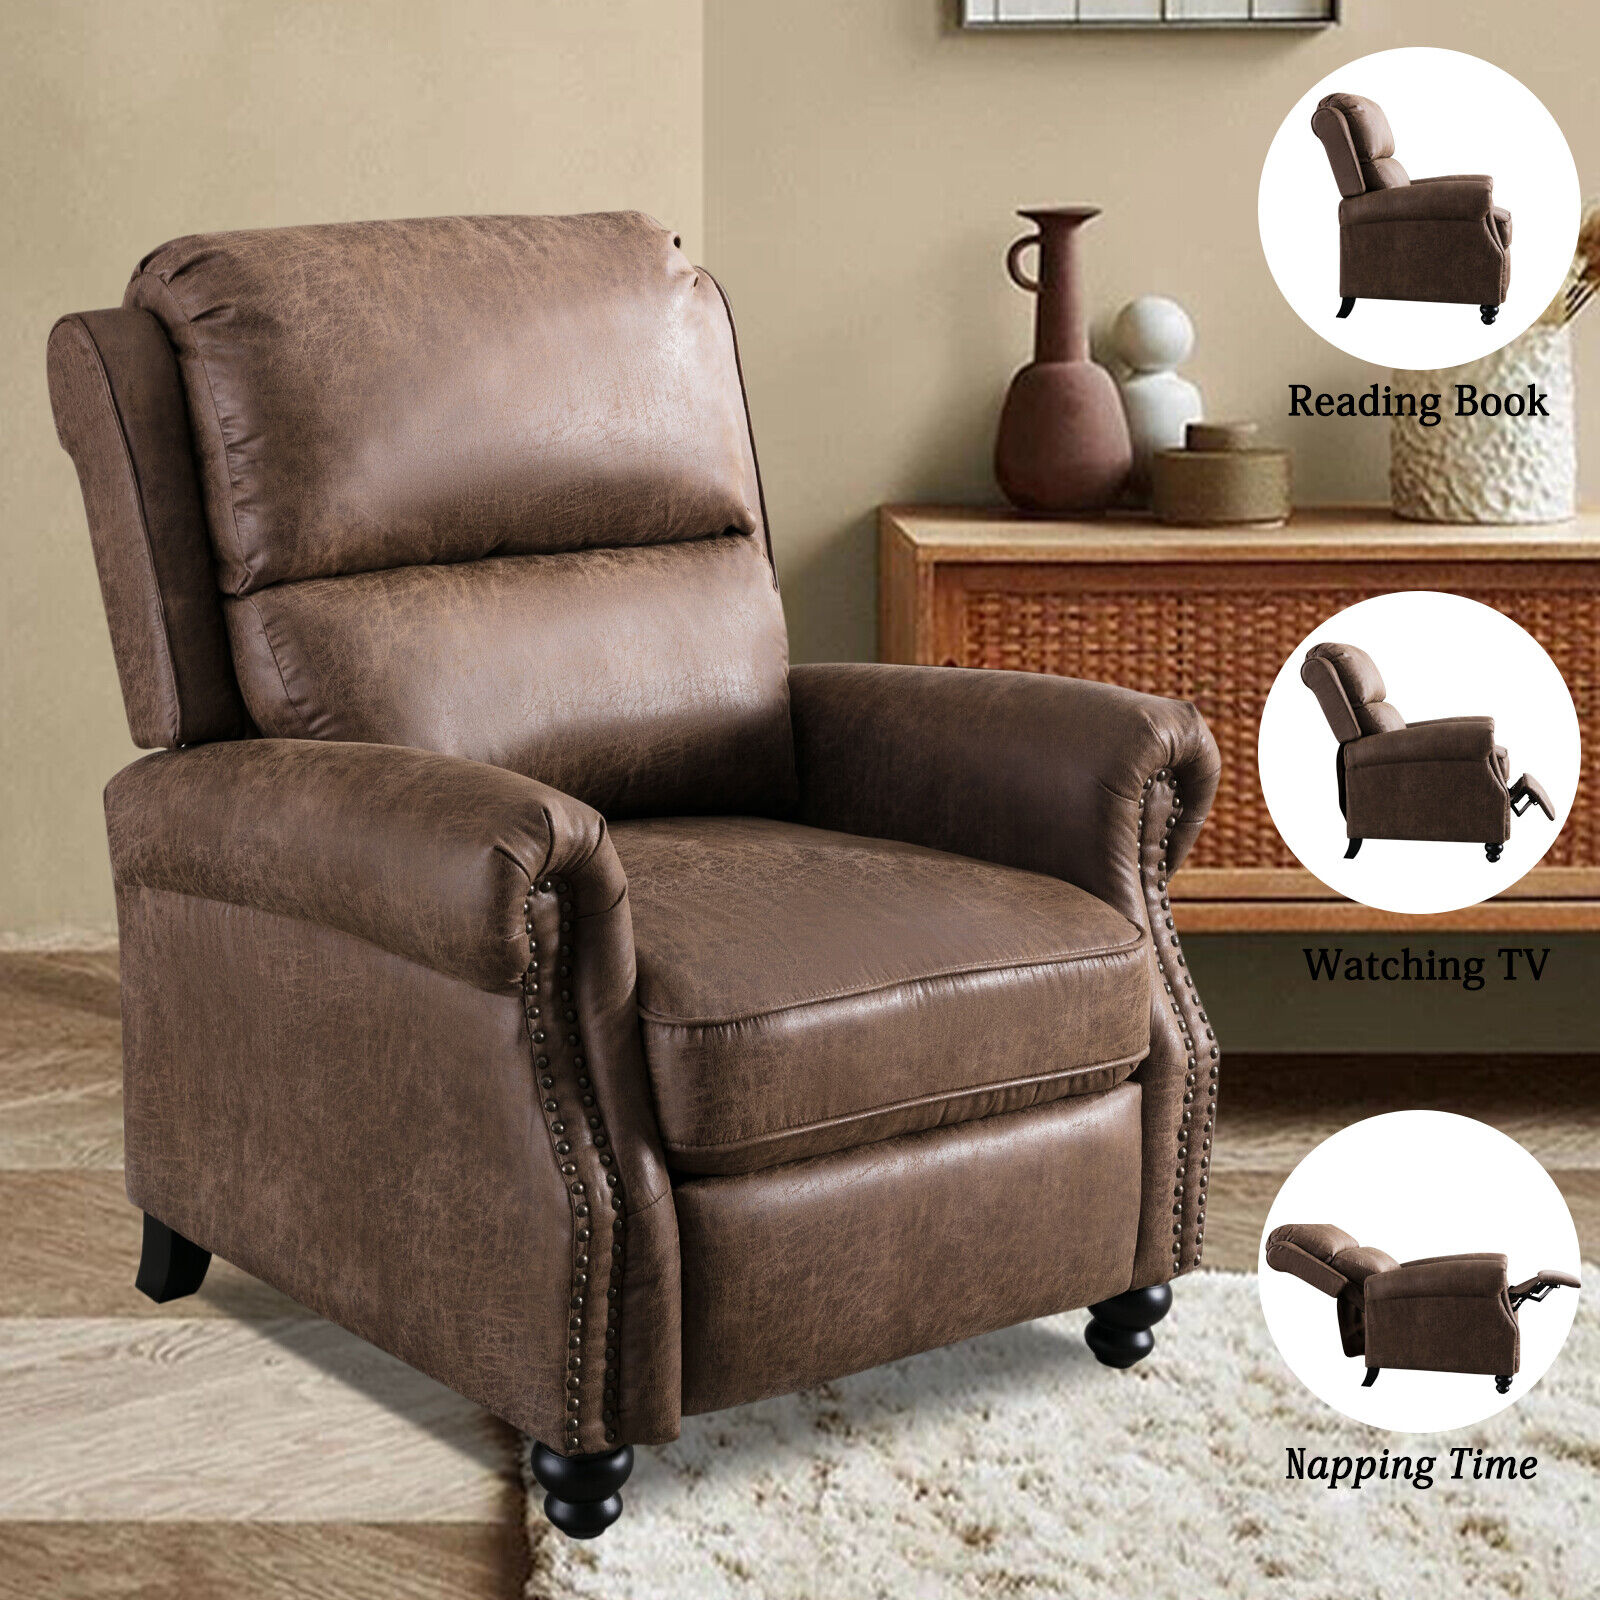 Push Back Recliner Chair With Rivet Decor Armchair For Livin